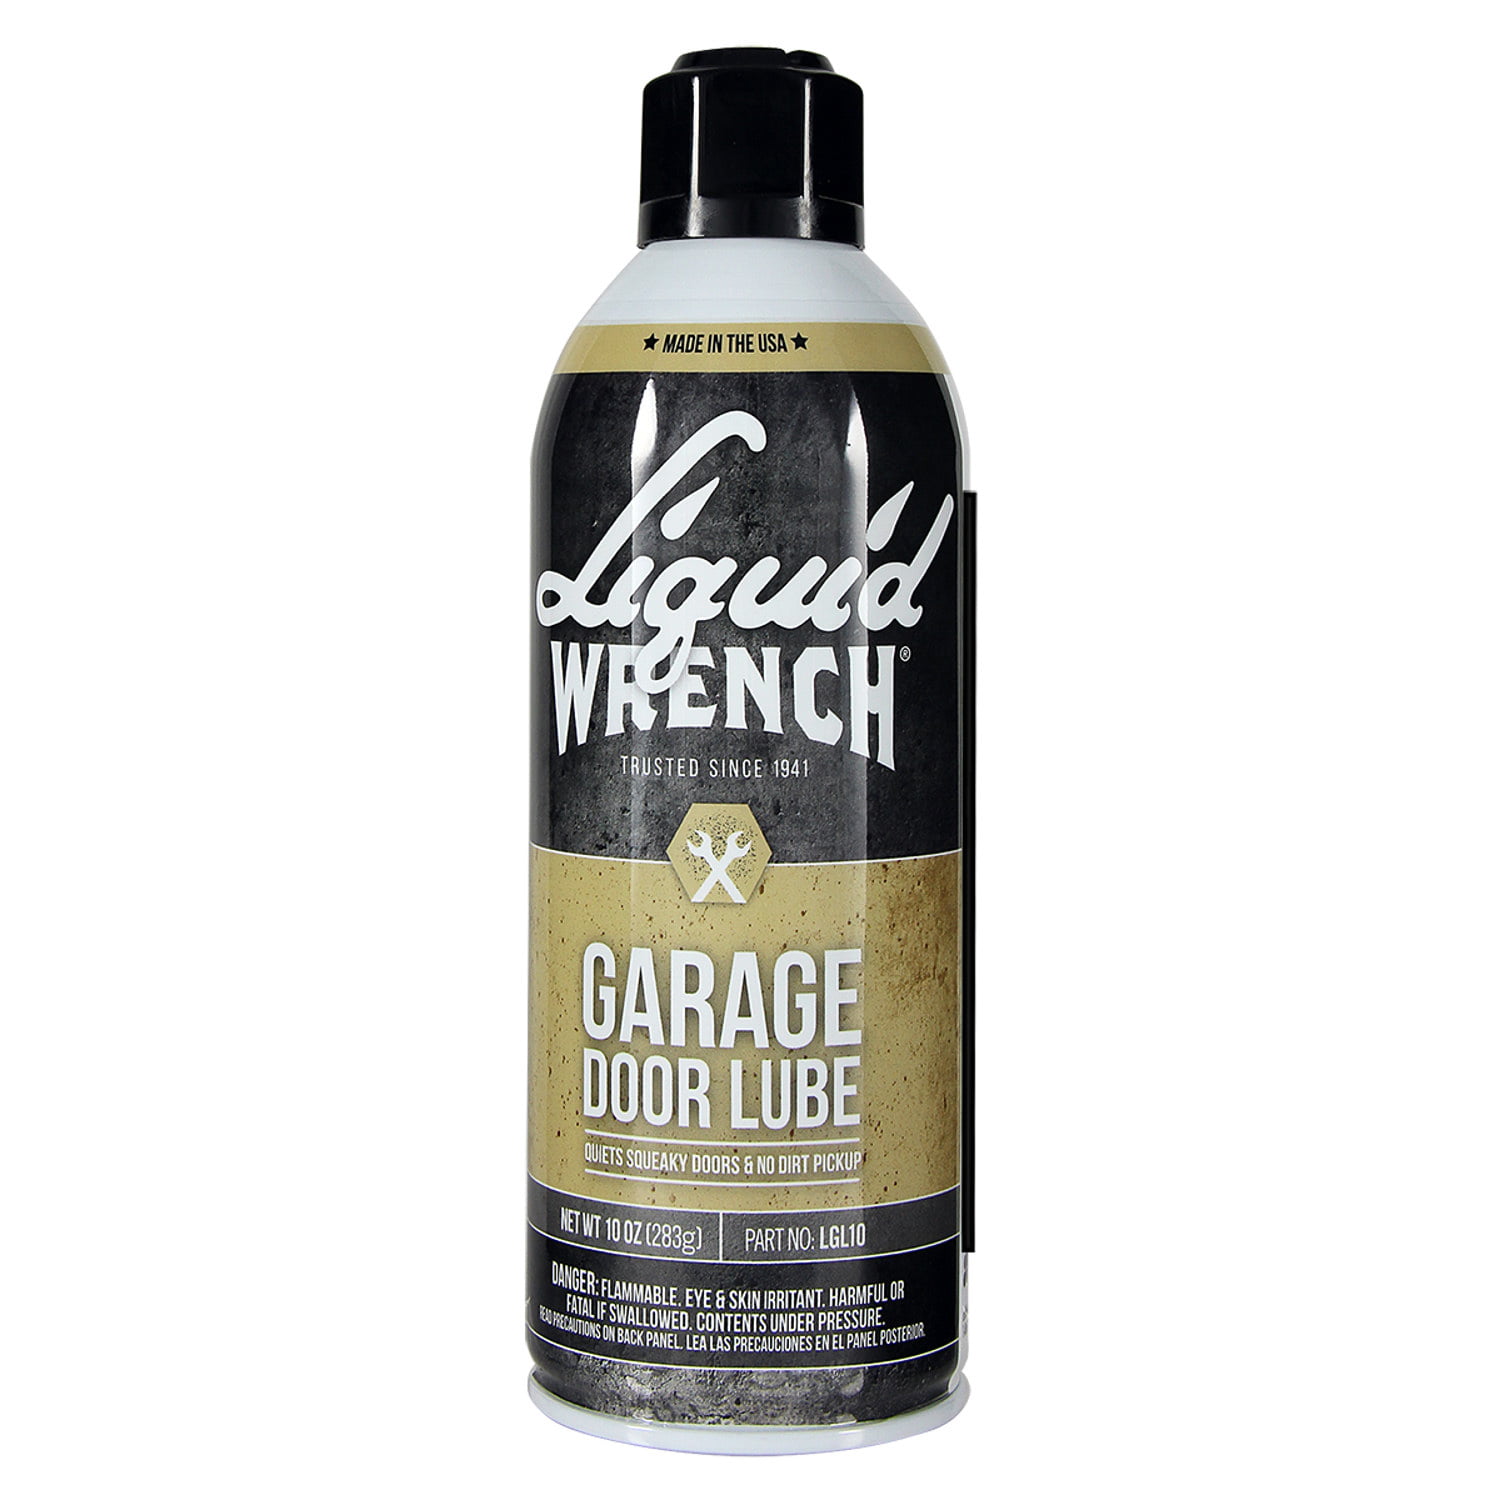 35 Electric Liquid wrench garage door lube review Central Cost